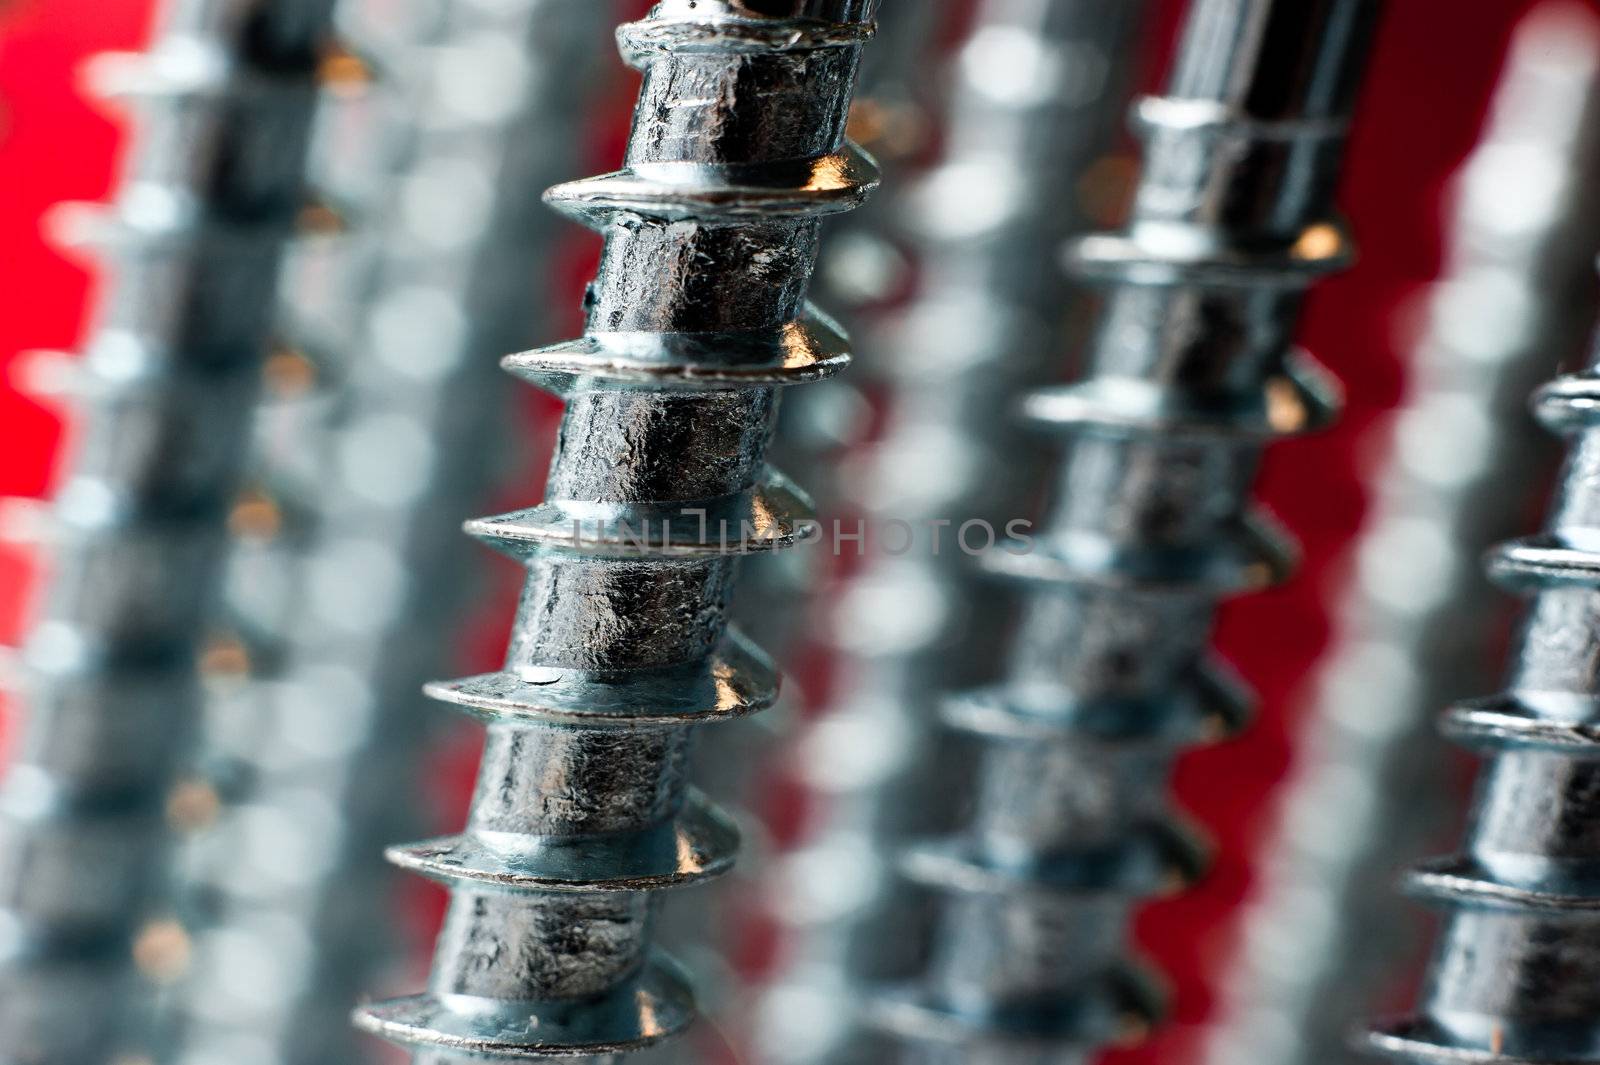 chrome screw on a blur red background